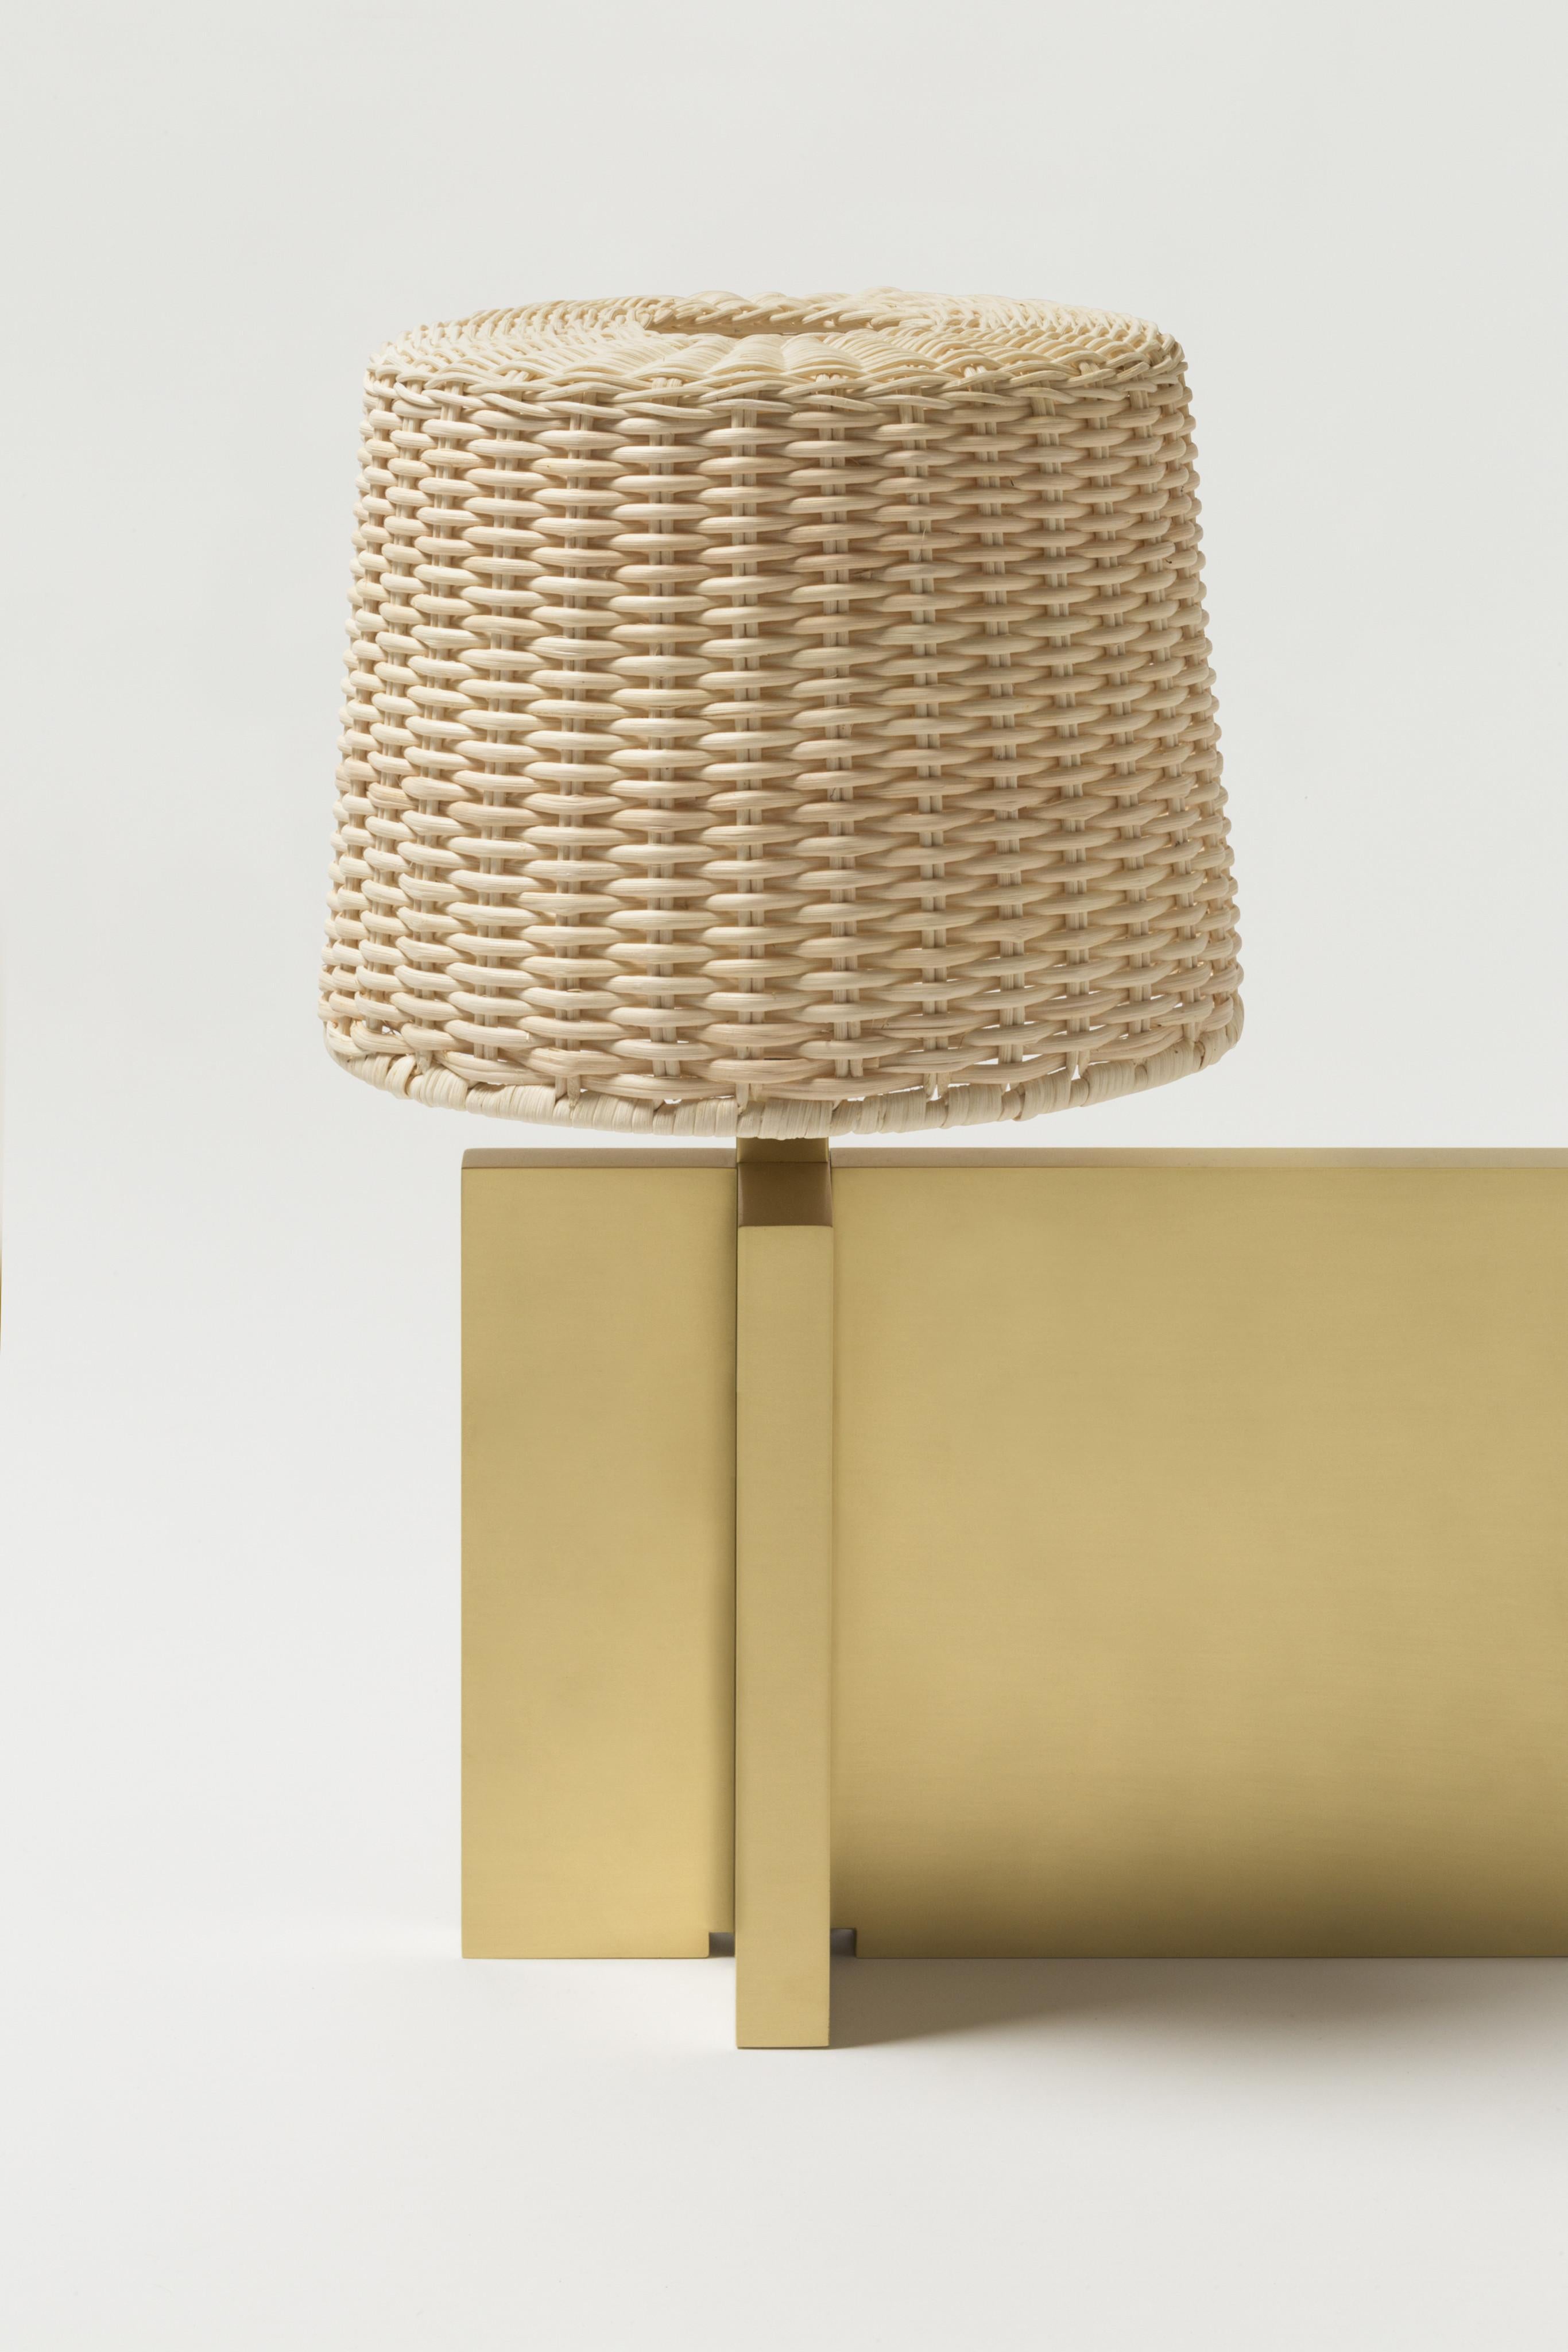 Lipari Table Lamp (Small) -- Stephane Parmentier x Giobagnara

Metal finishing has to be indicated; chrome/brass/bronze available. Shade is available only in natural rattan.

Embracing sleek designs and beautiful materials, the Stephane Parmentier